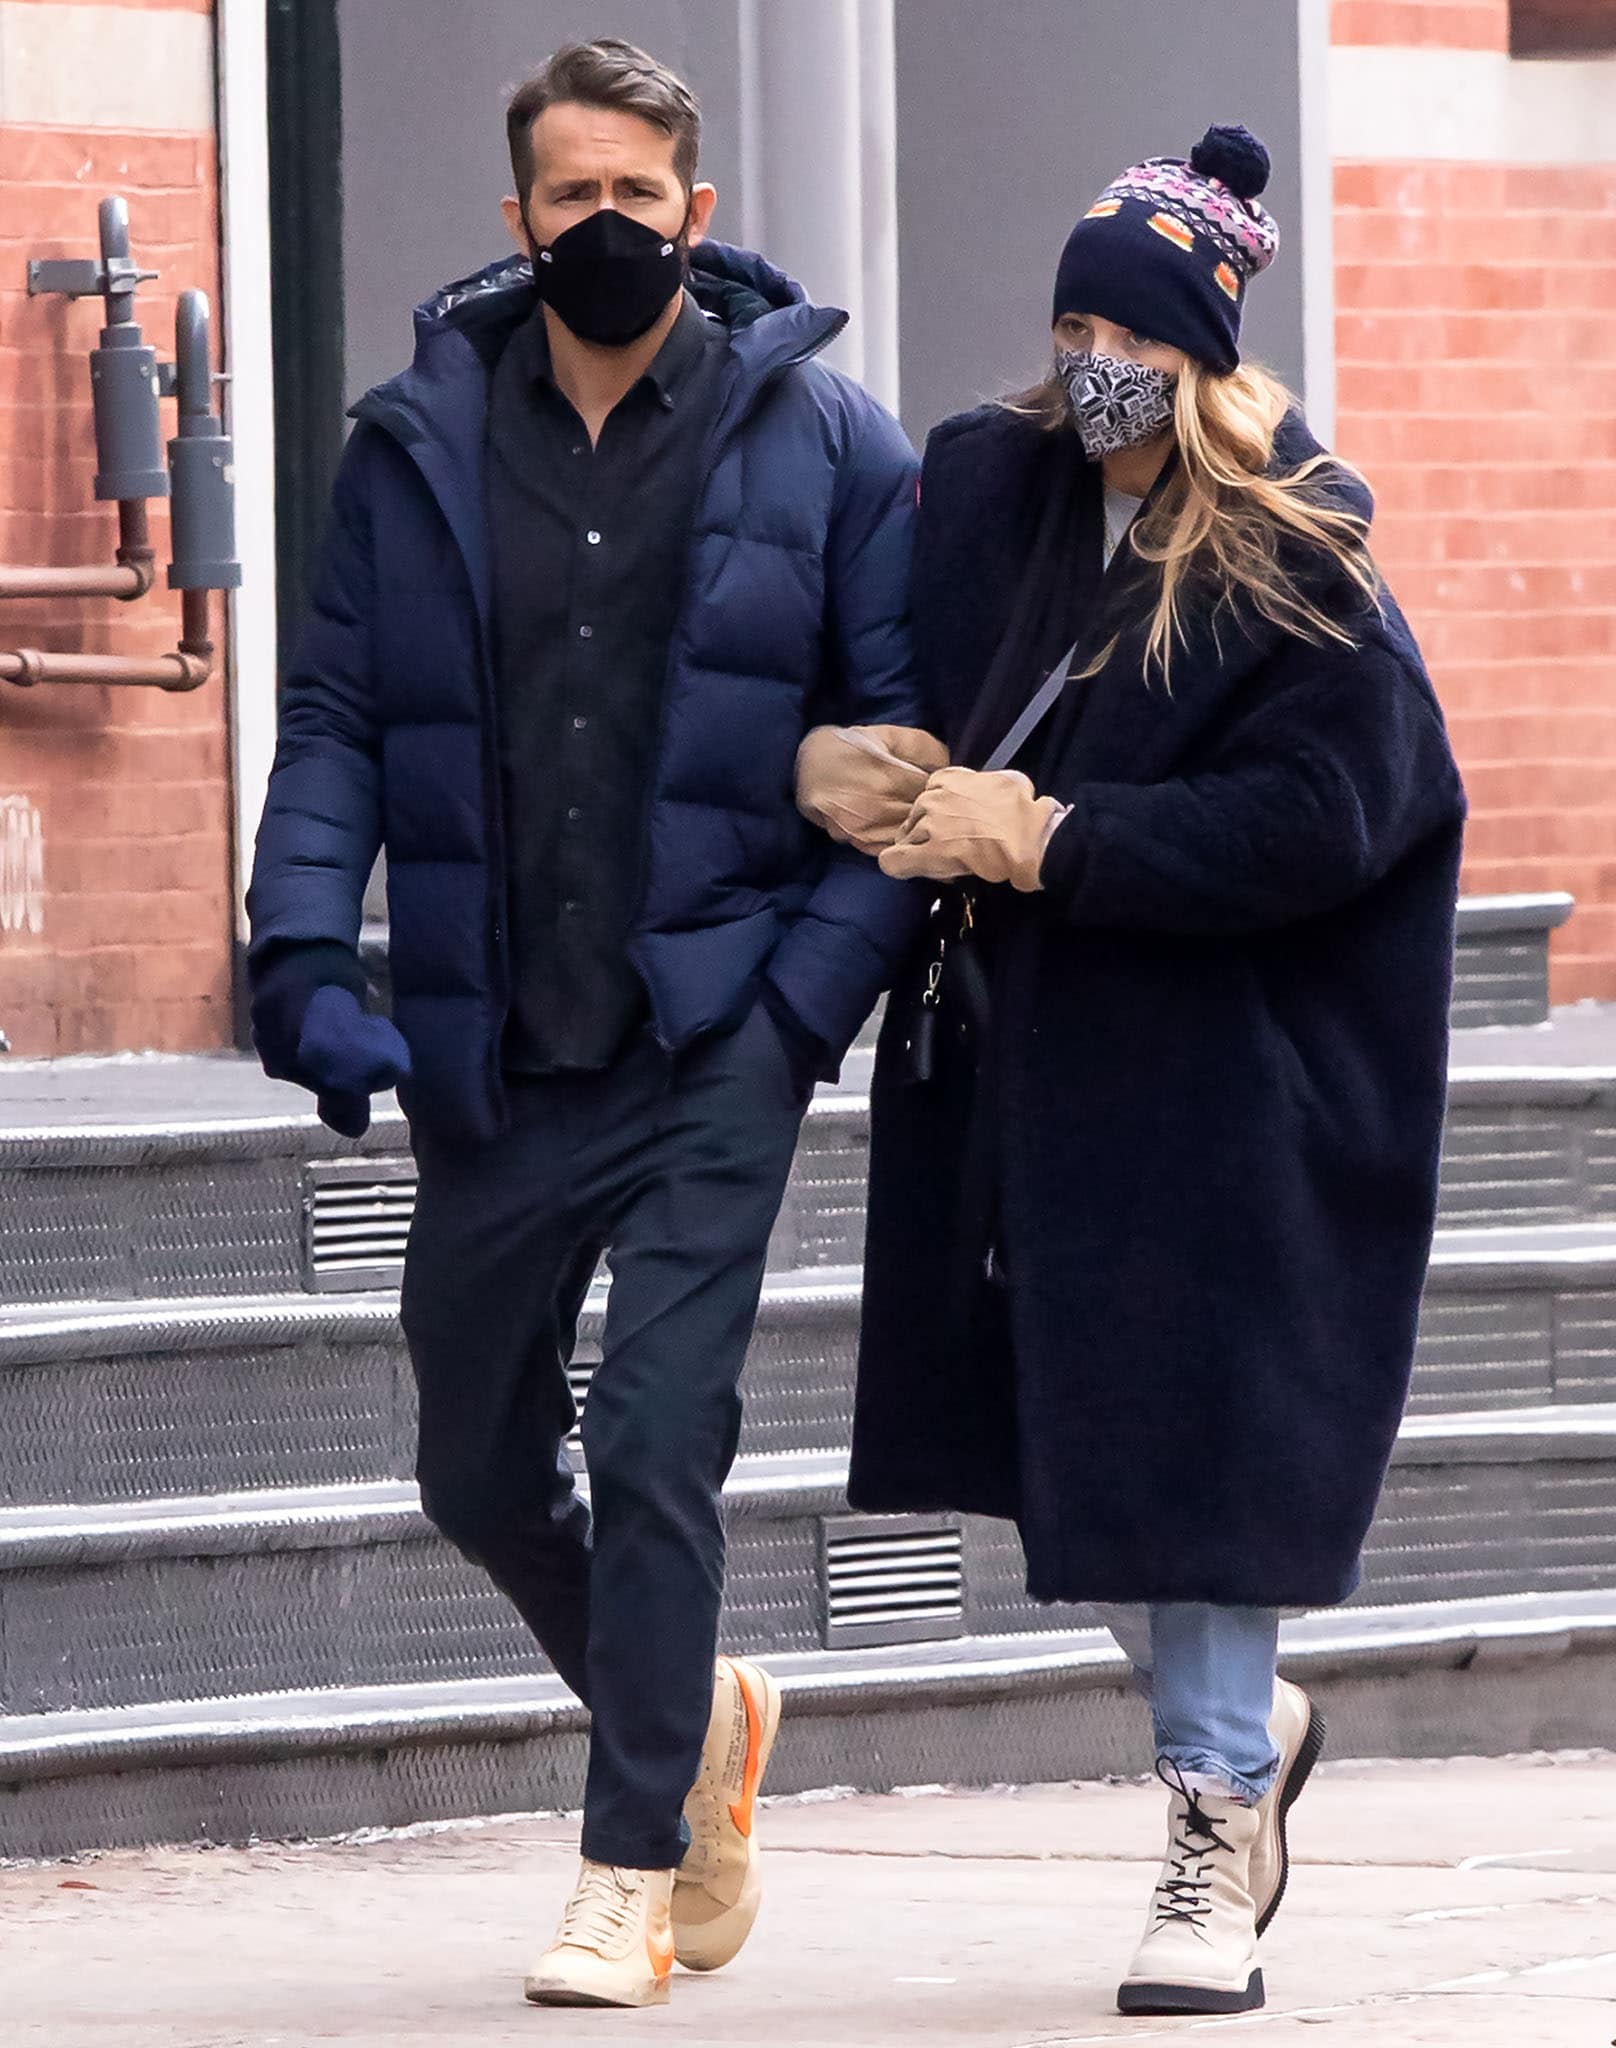 Ryan Reynolds stays warm in a navy Canada Goose puffer jacket, jeans, and Off-White x Nike Blazer sneakers